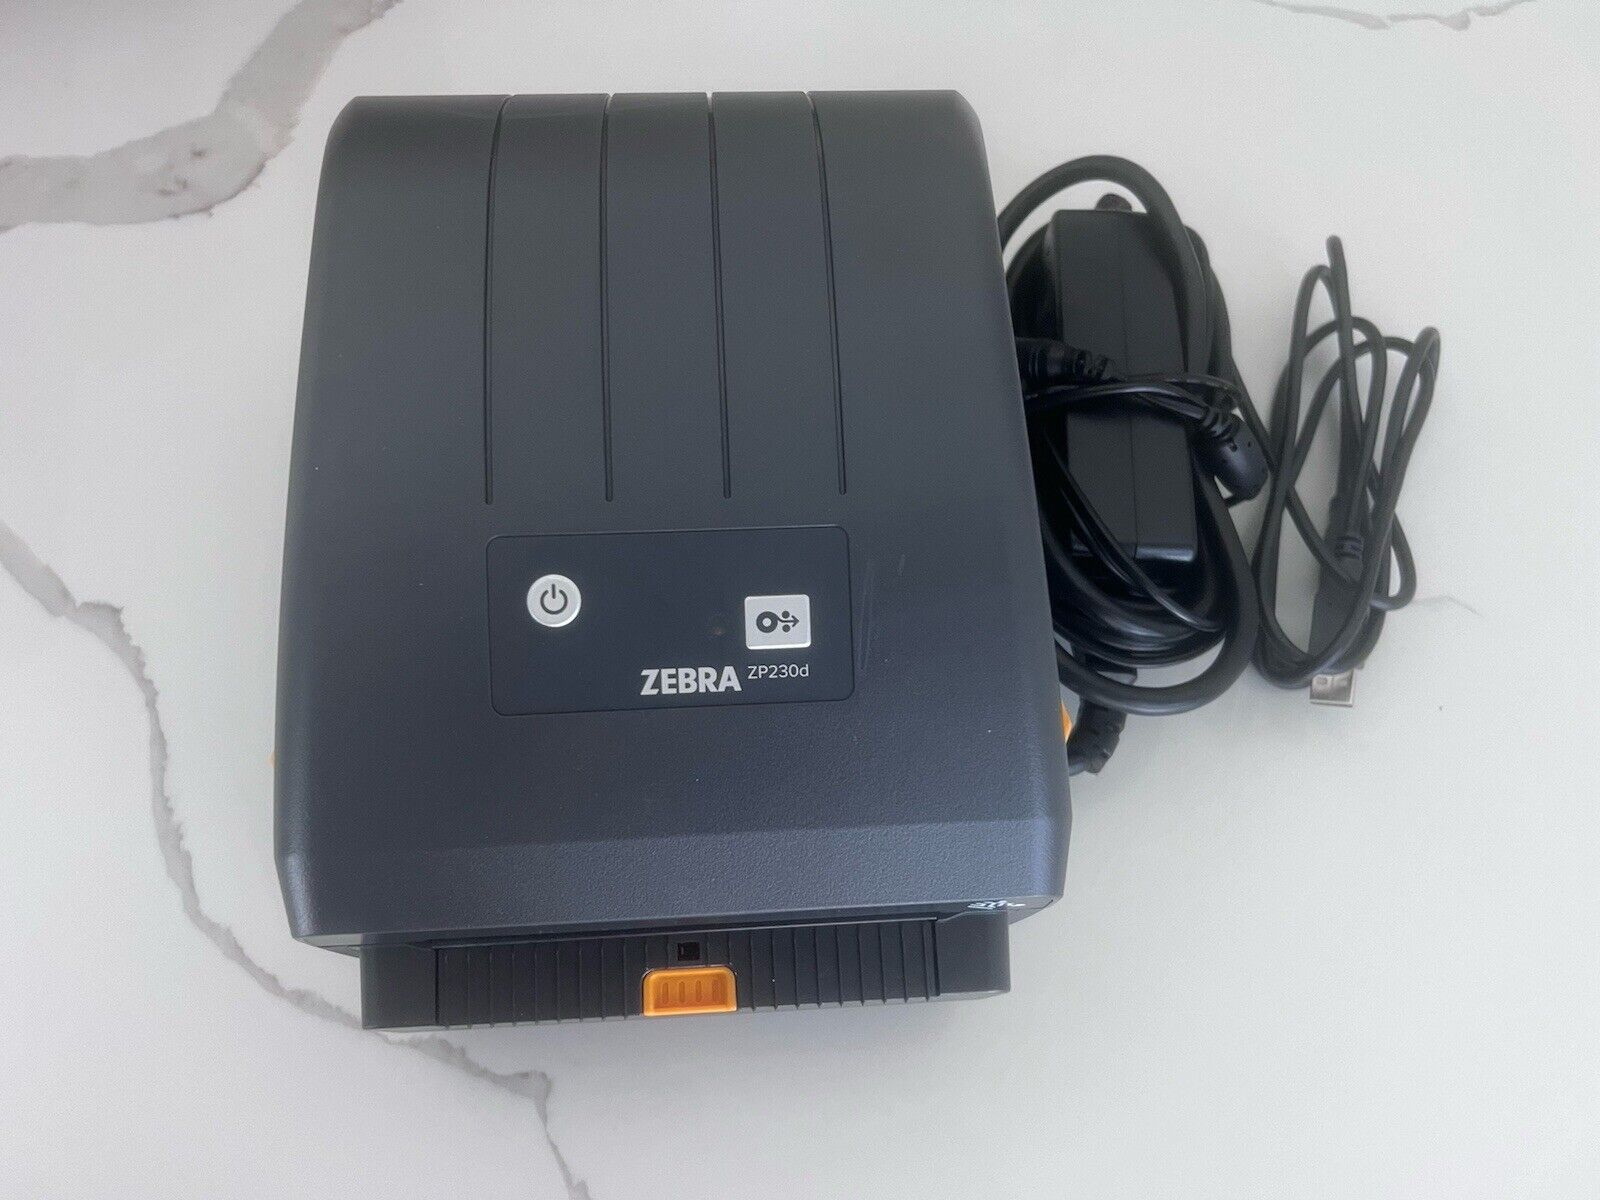 Zebra ZP230d Thermal Label Printer With AC Adapter